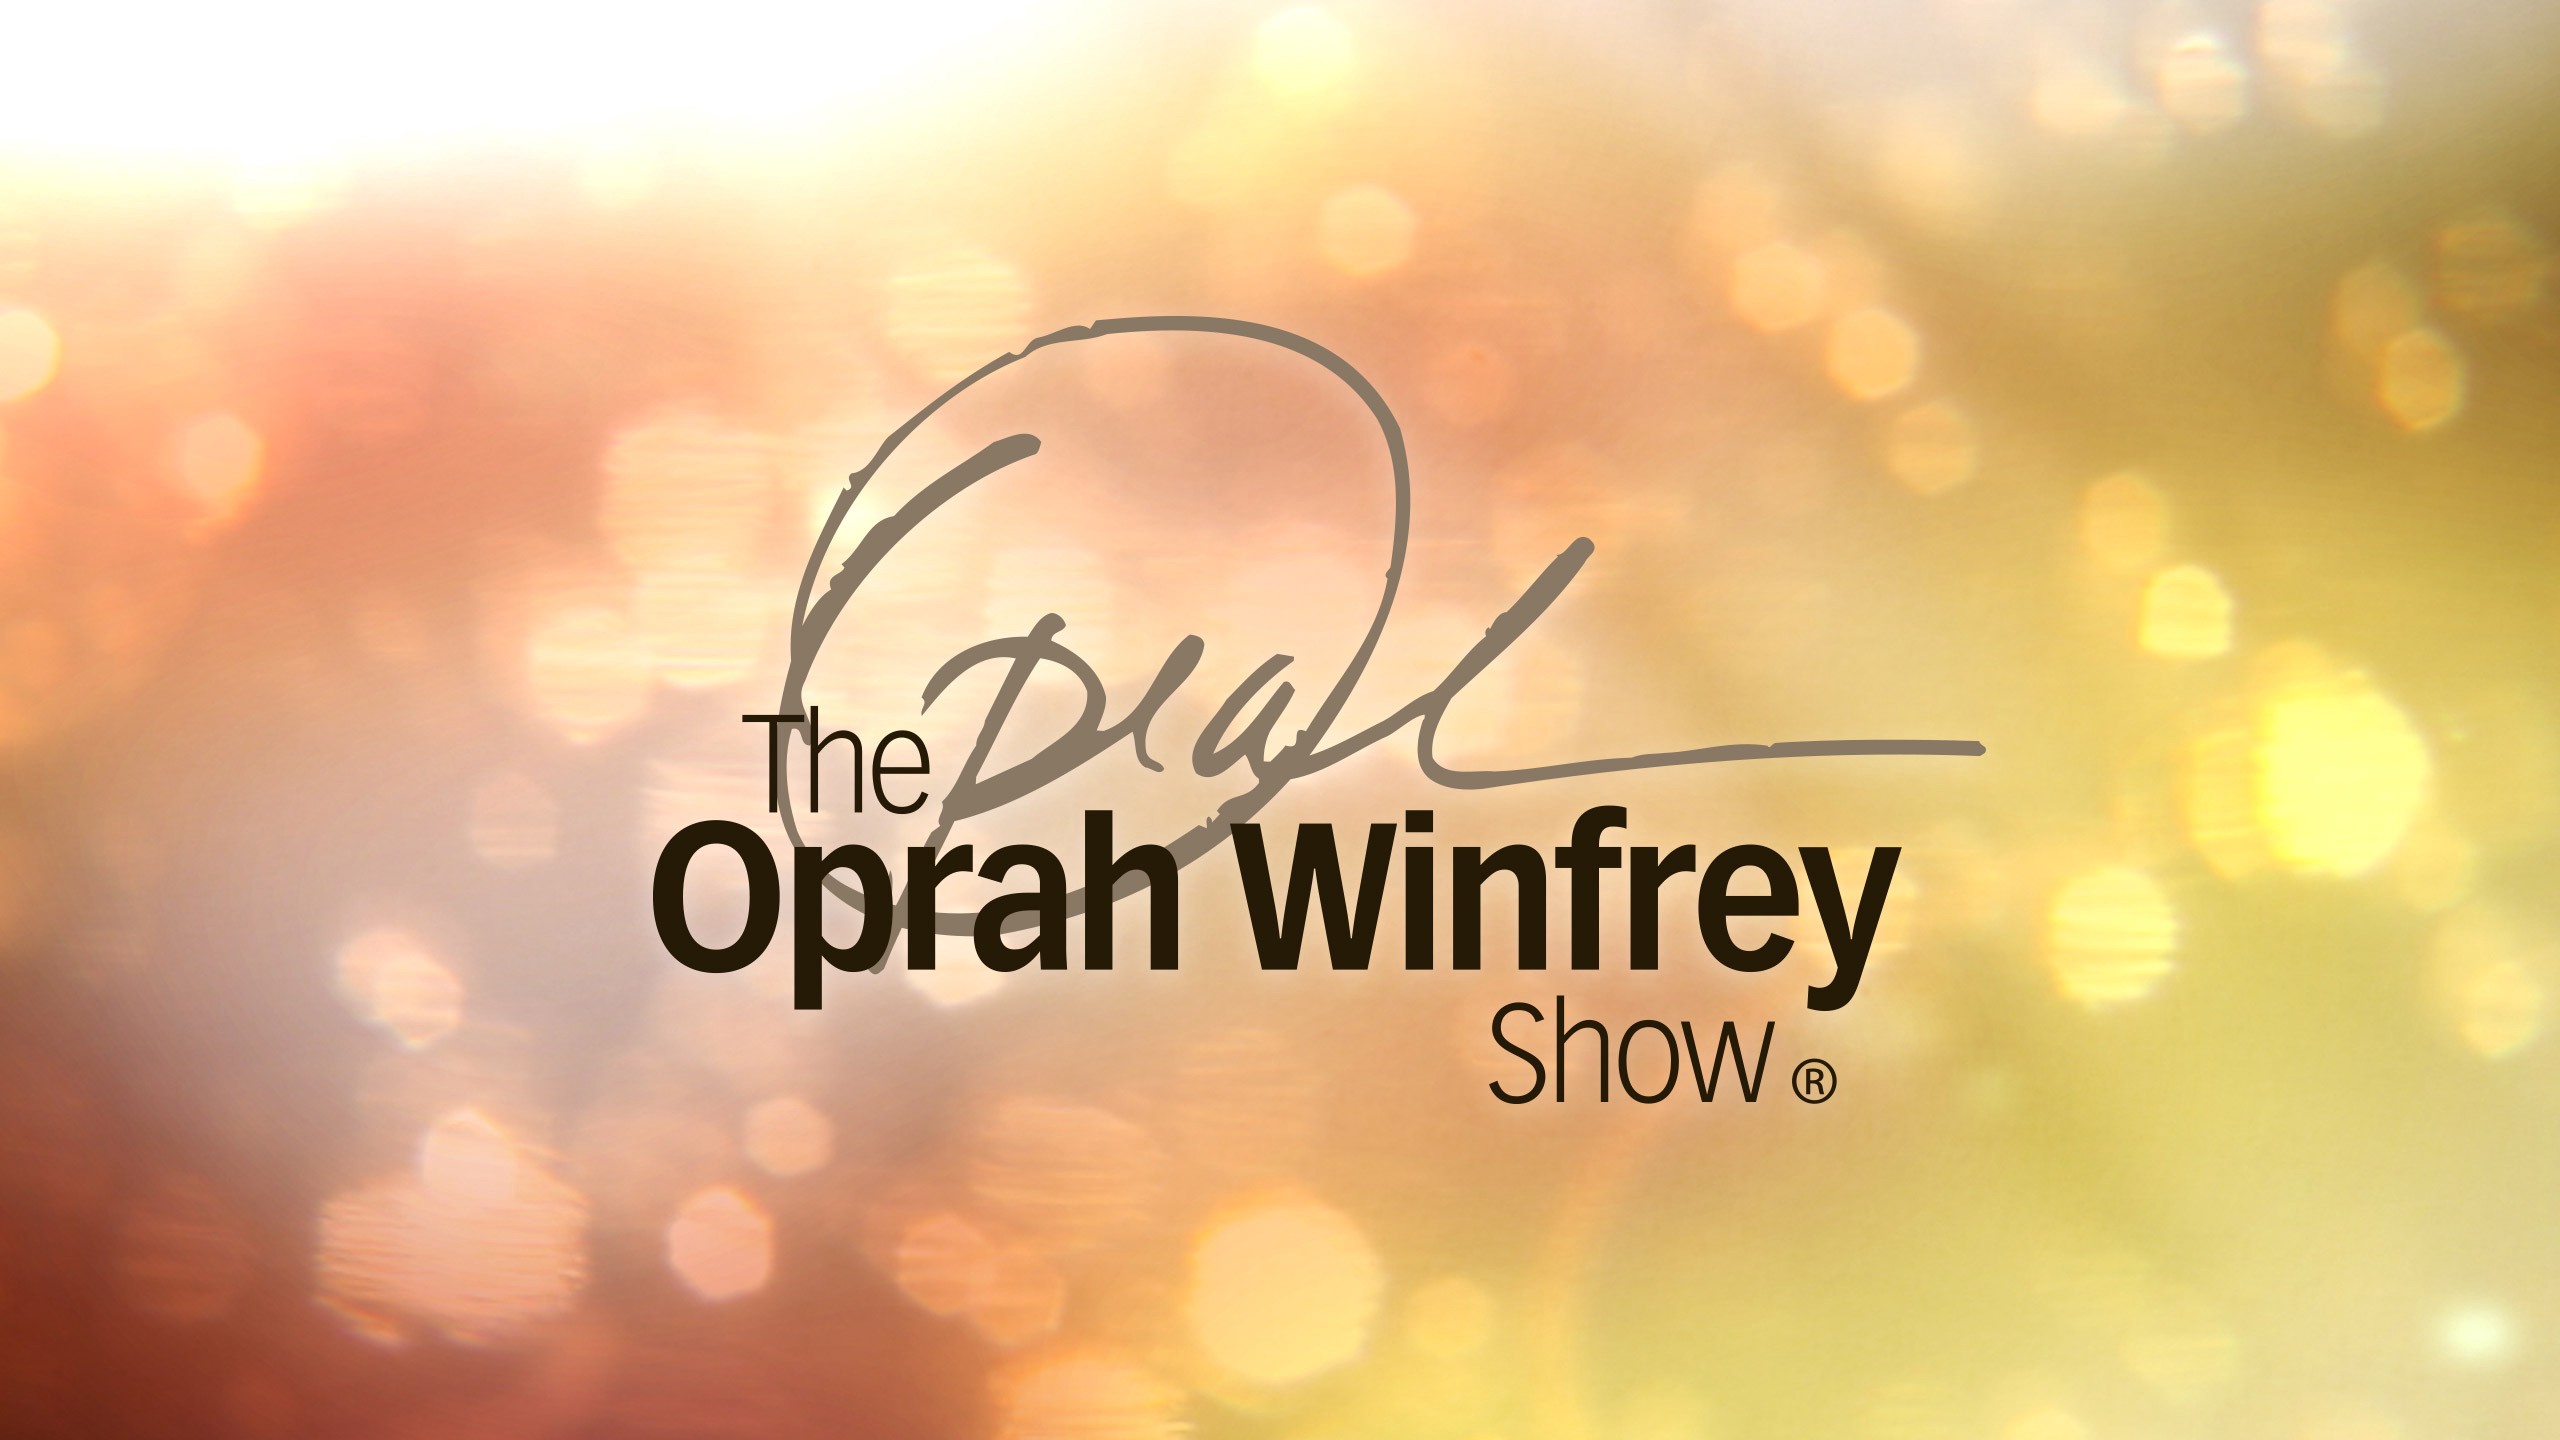 fusion solely system The Oprah Winfrey Show | OWN